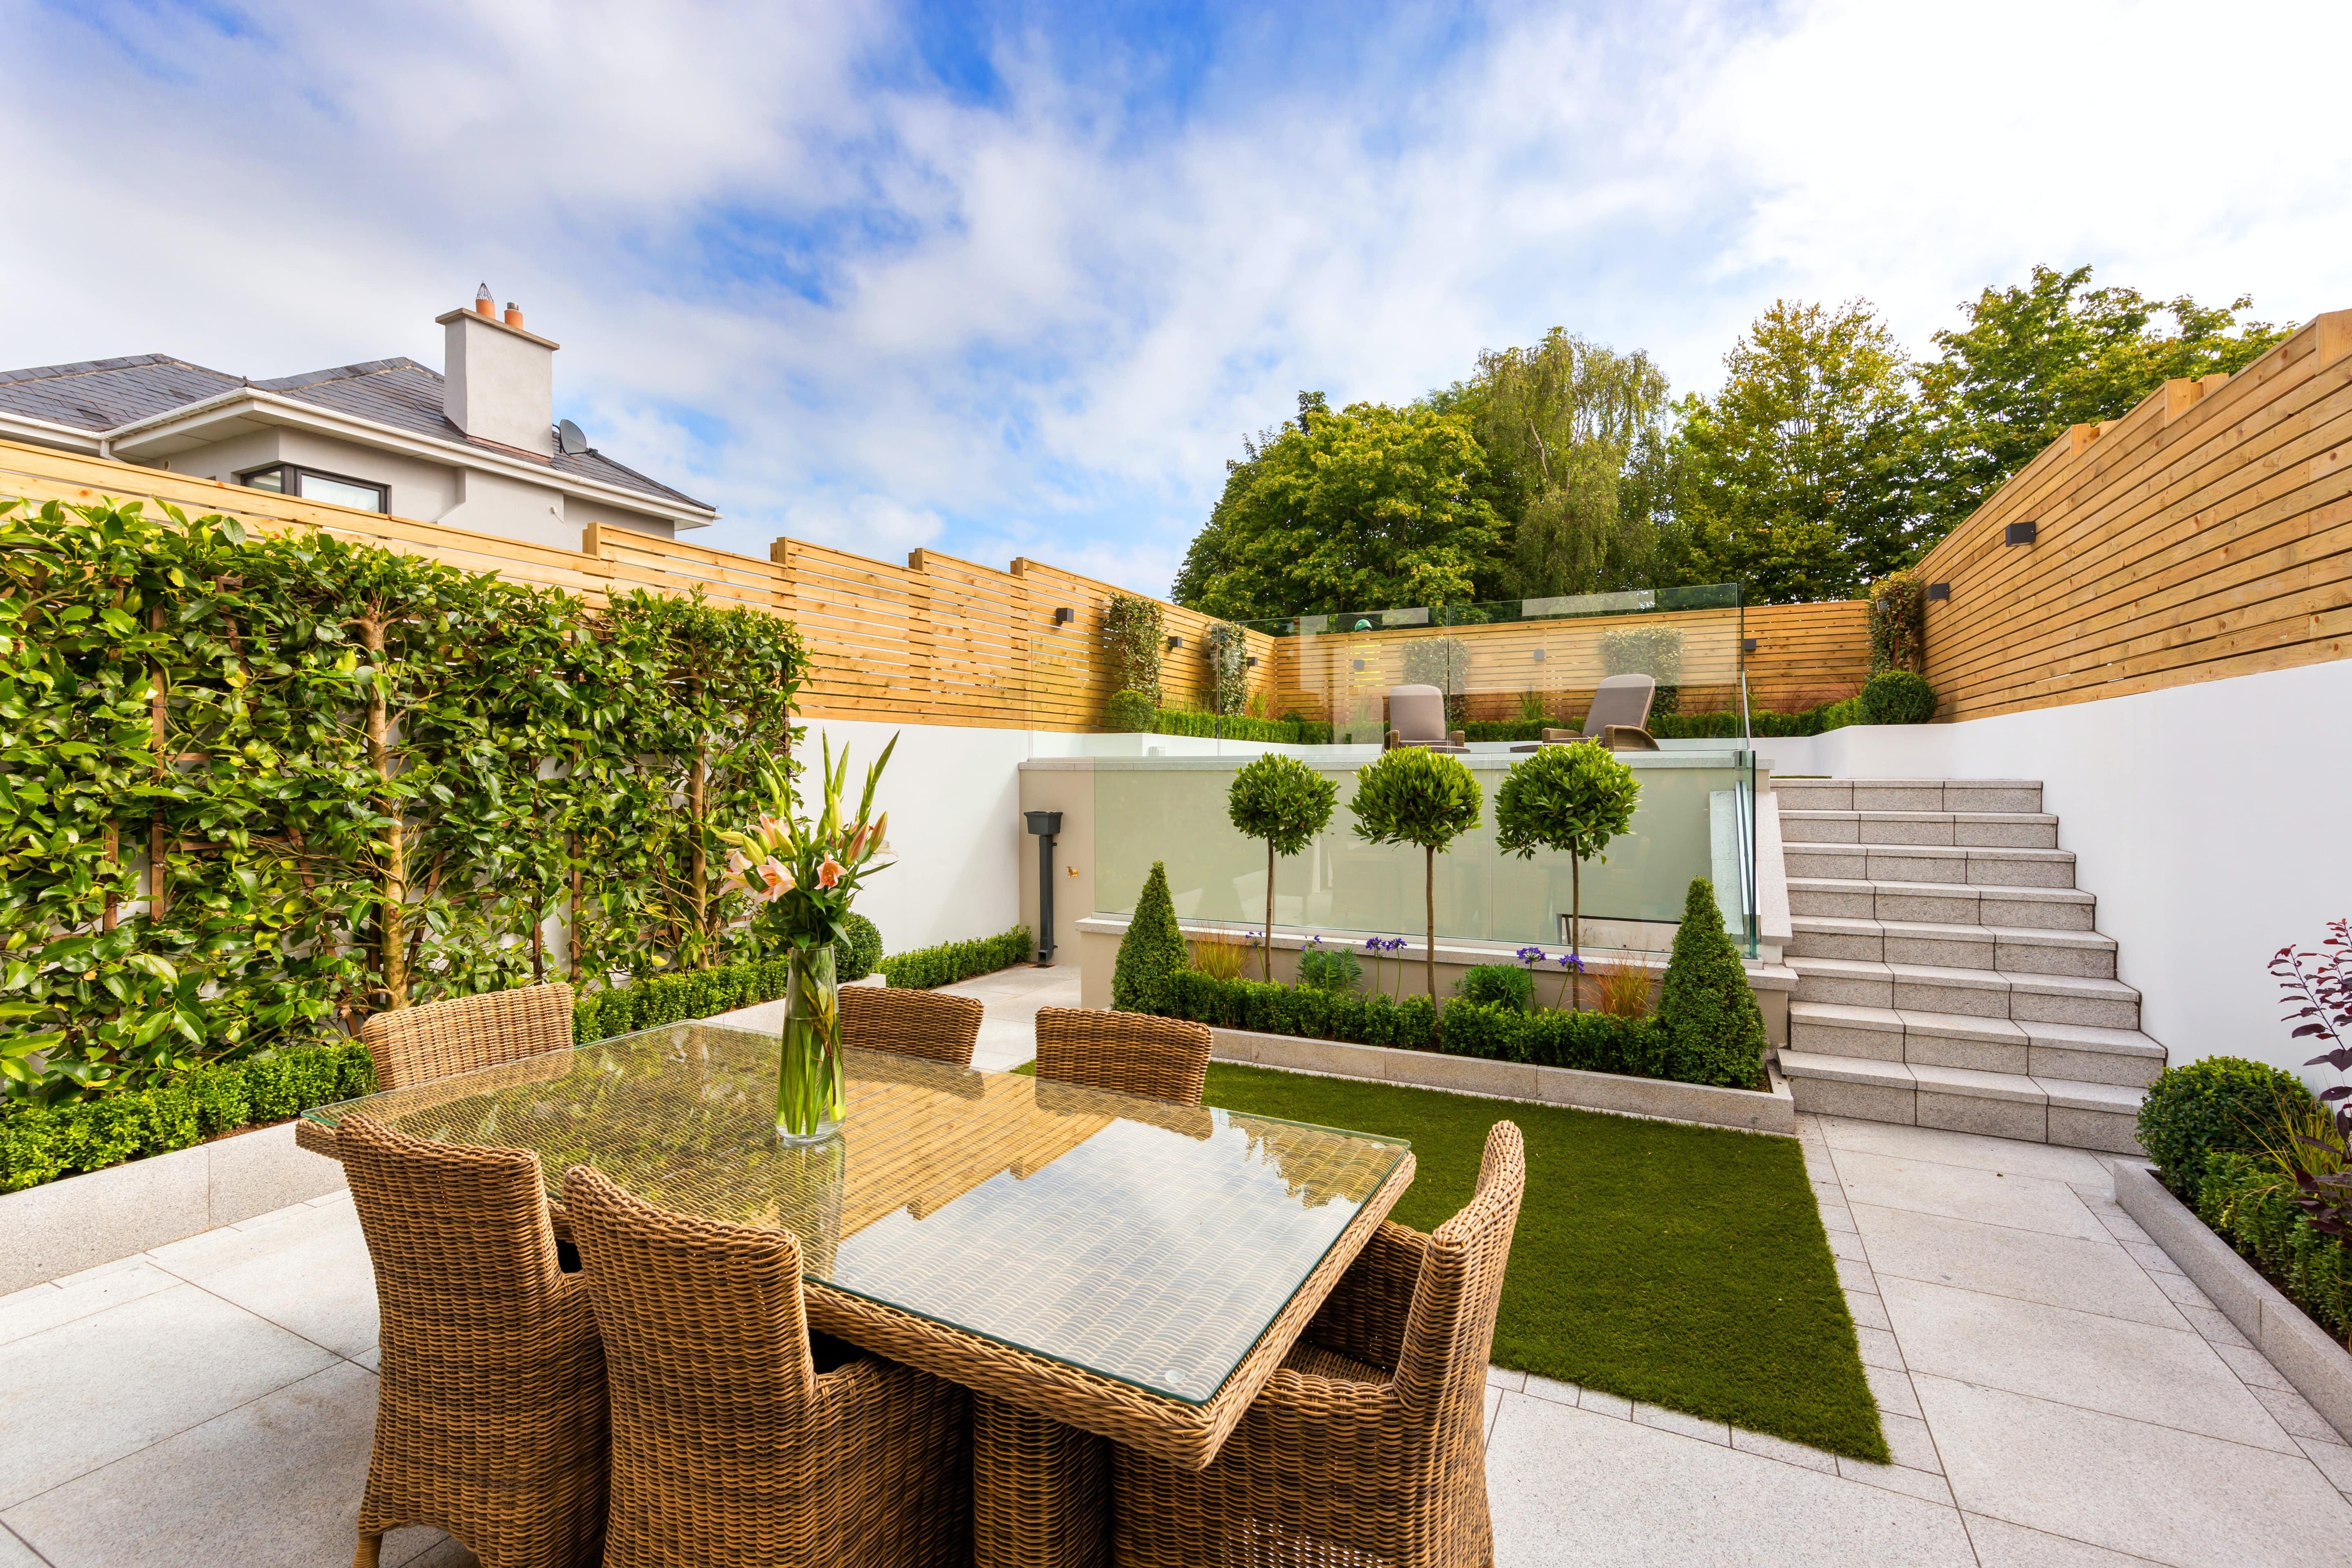 A luxury outdoor space with wicker furniture and green landscaping